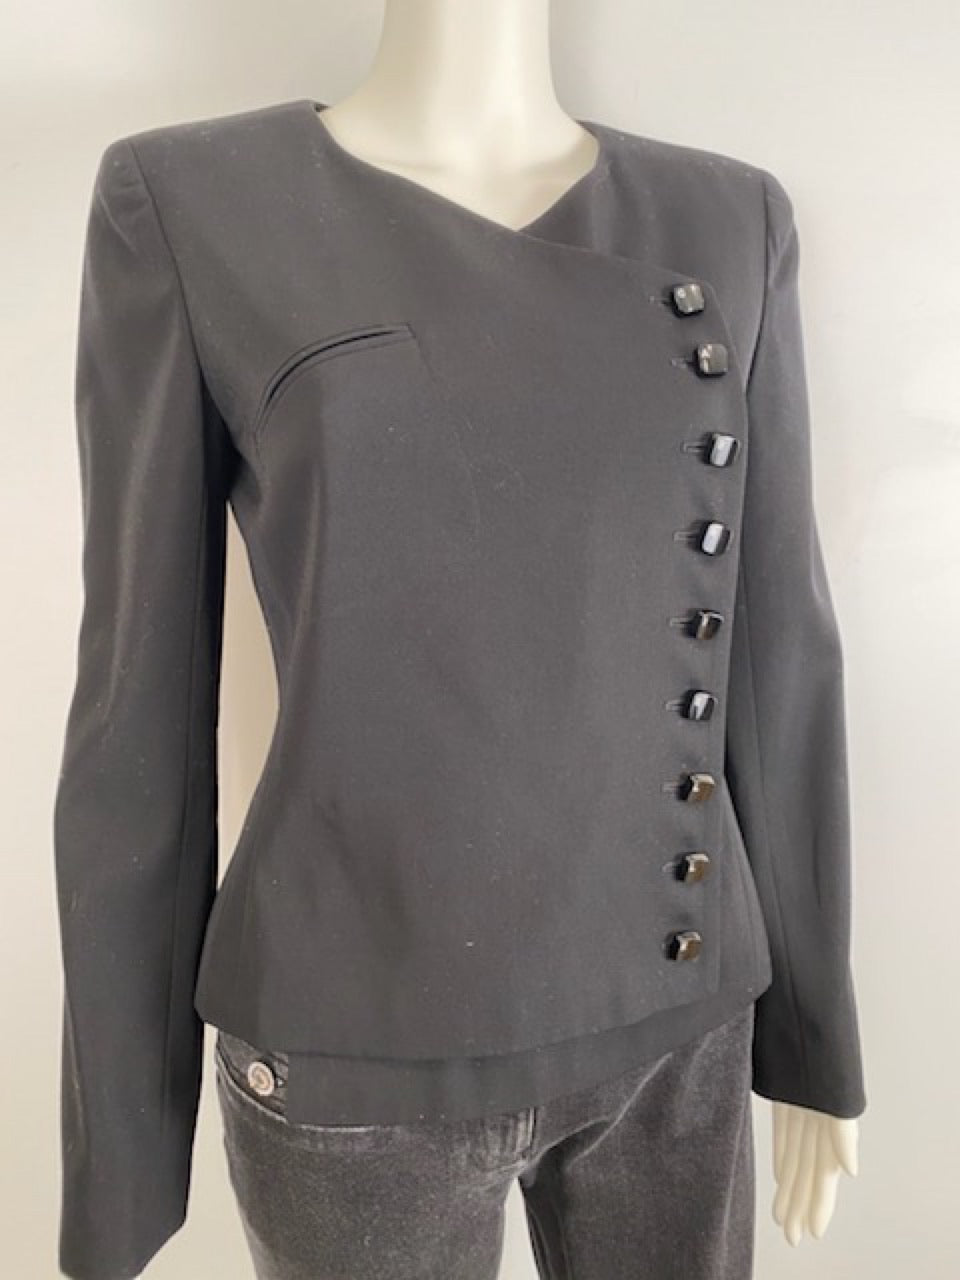 HelensChanel Chanel 00T, 2000 Transition Collection ‘GABRIELLE’ Buttons Black Jacket FR 38 US 4